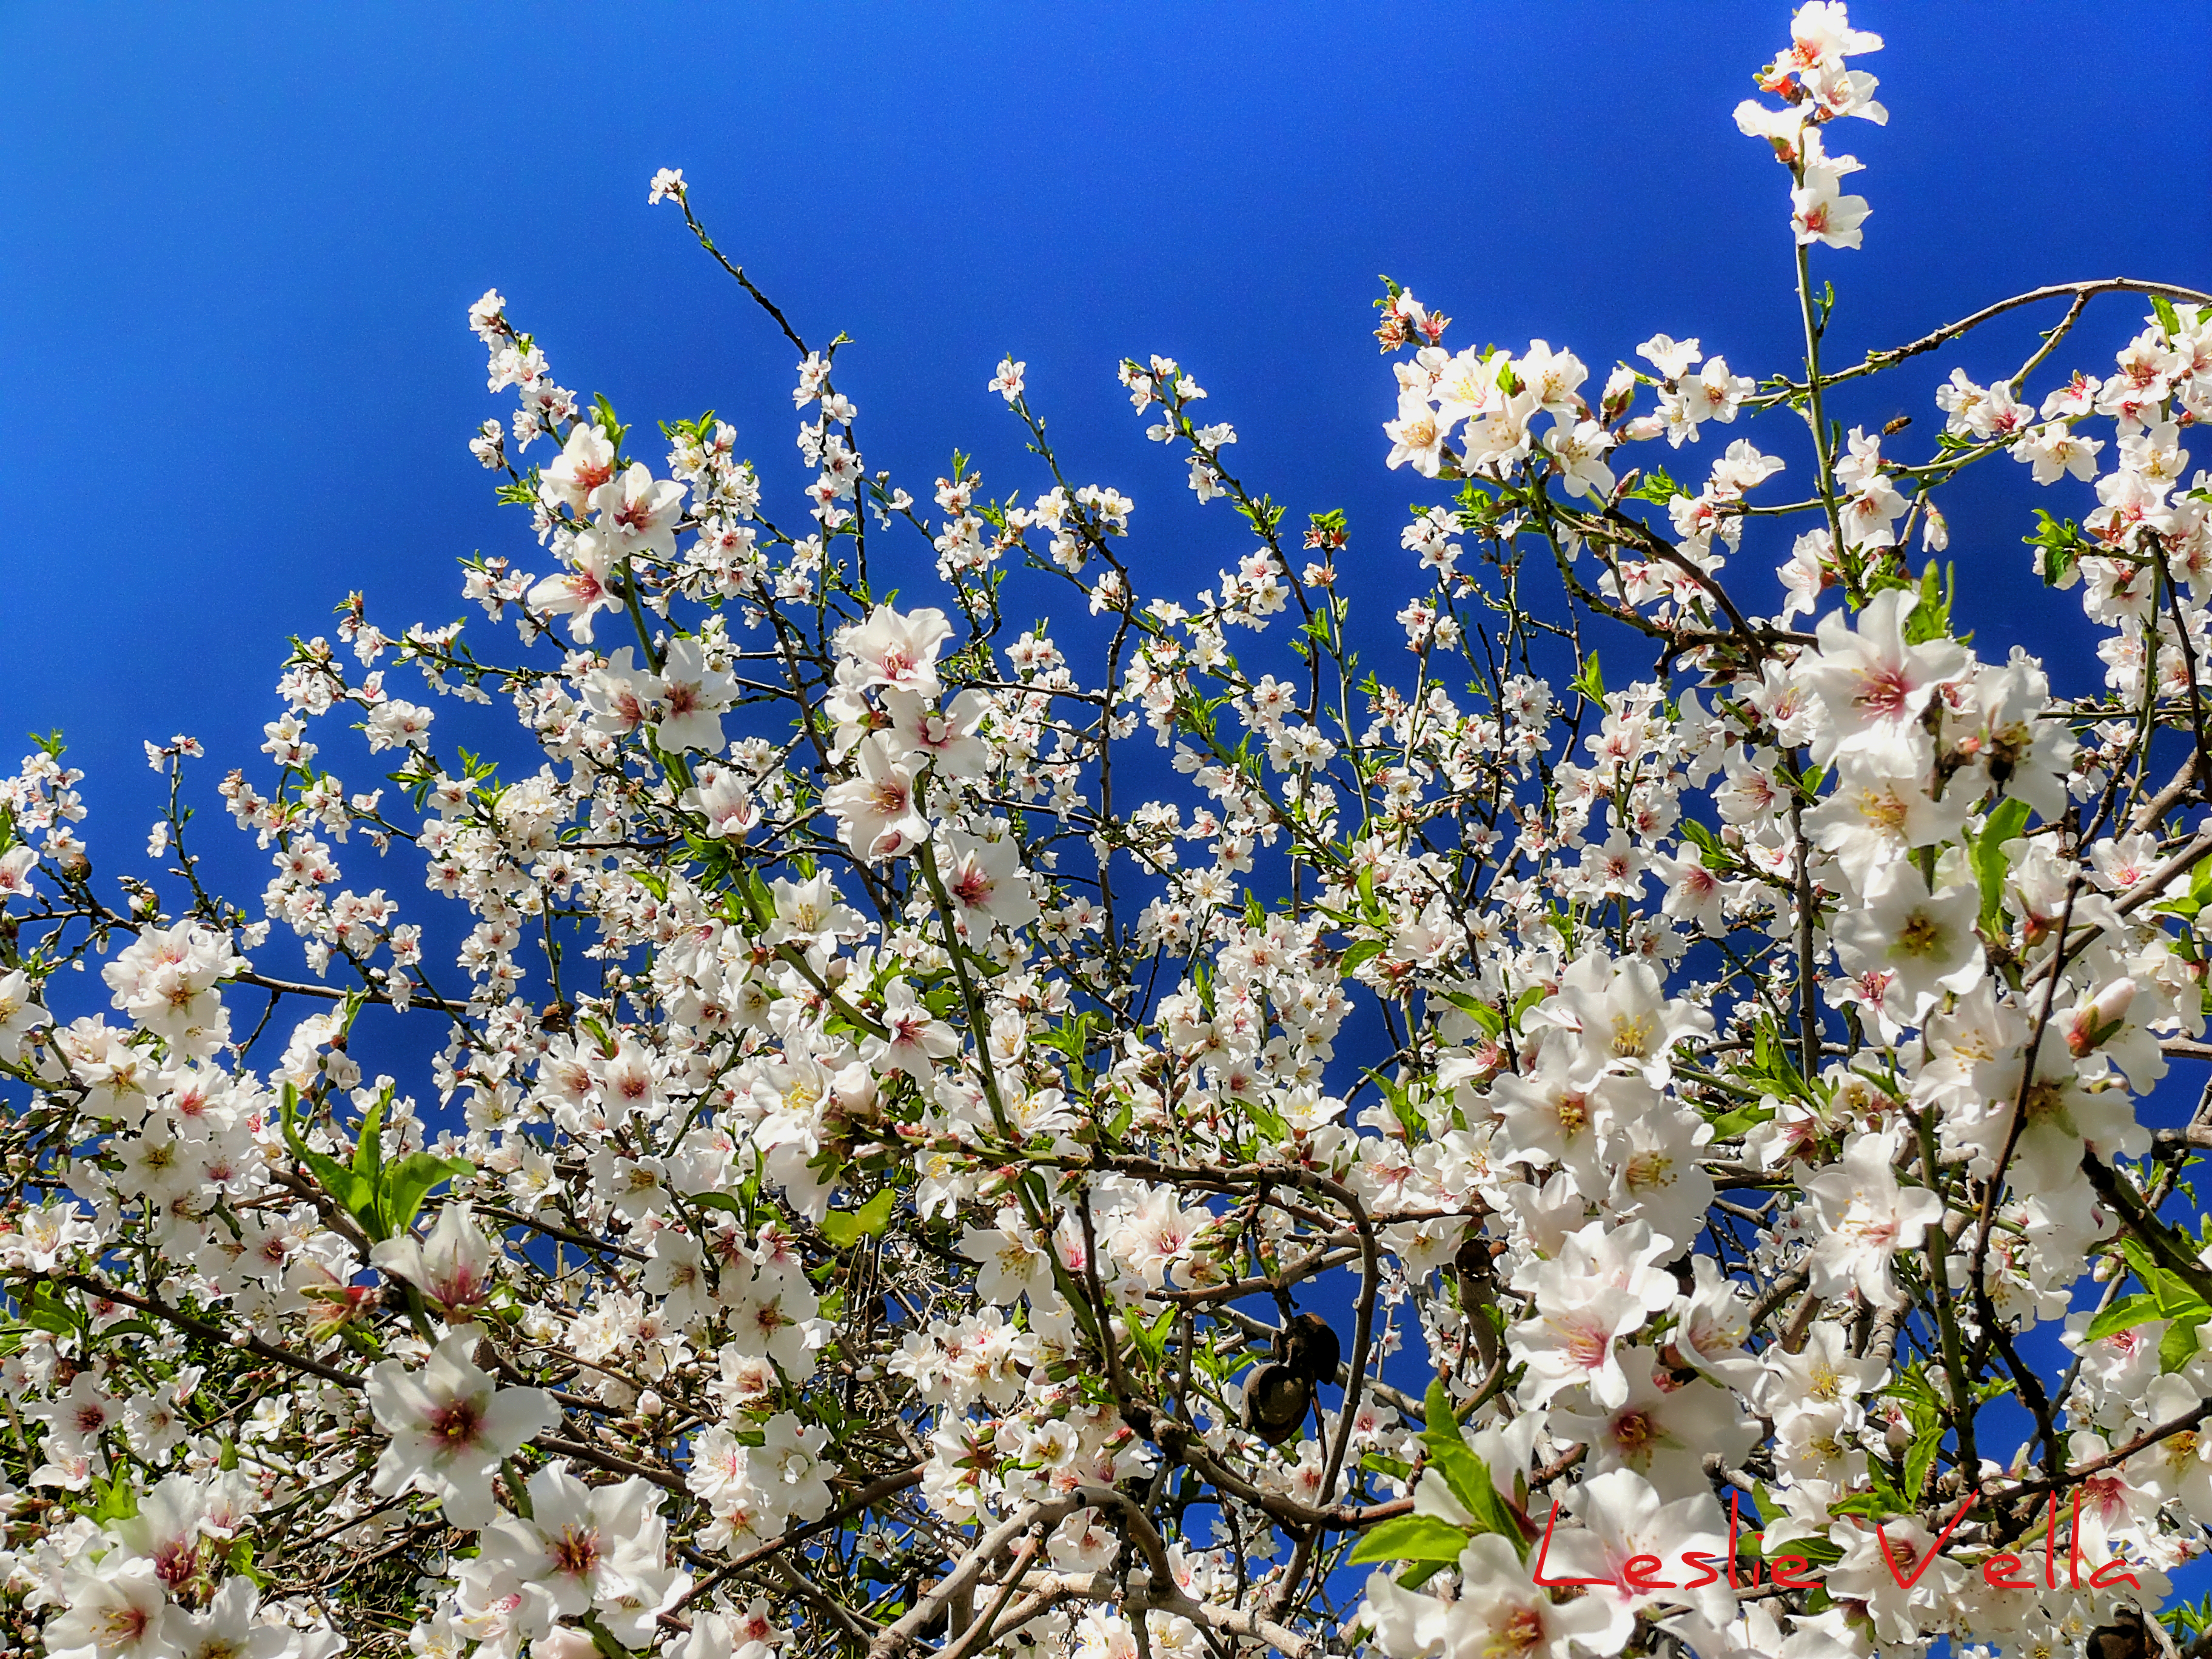 The blossoming almond tree: the first sign of the approaching spring ...